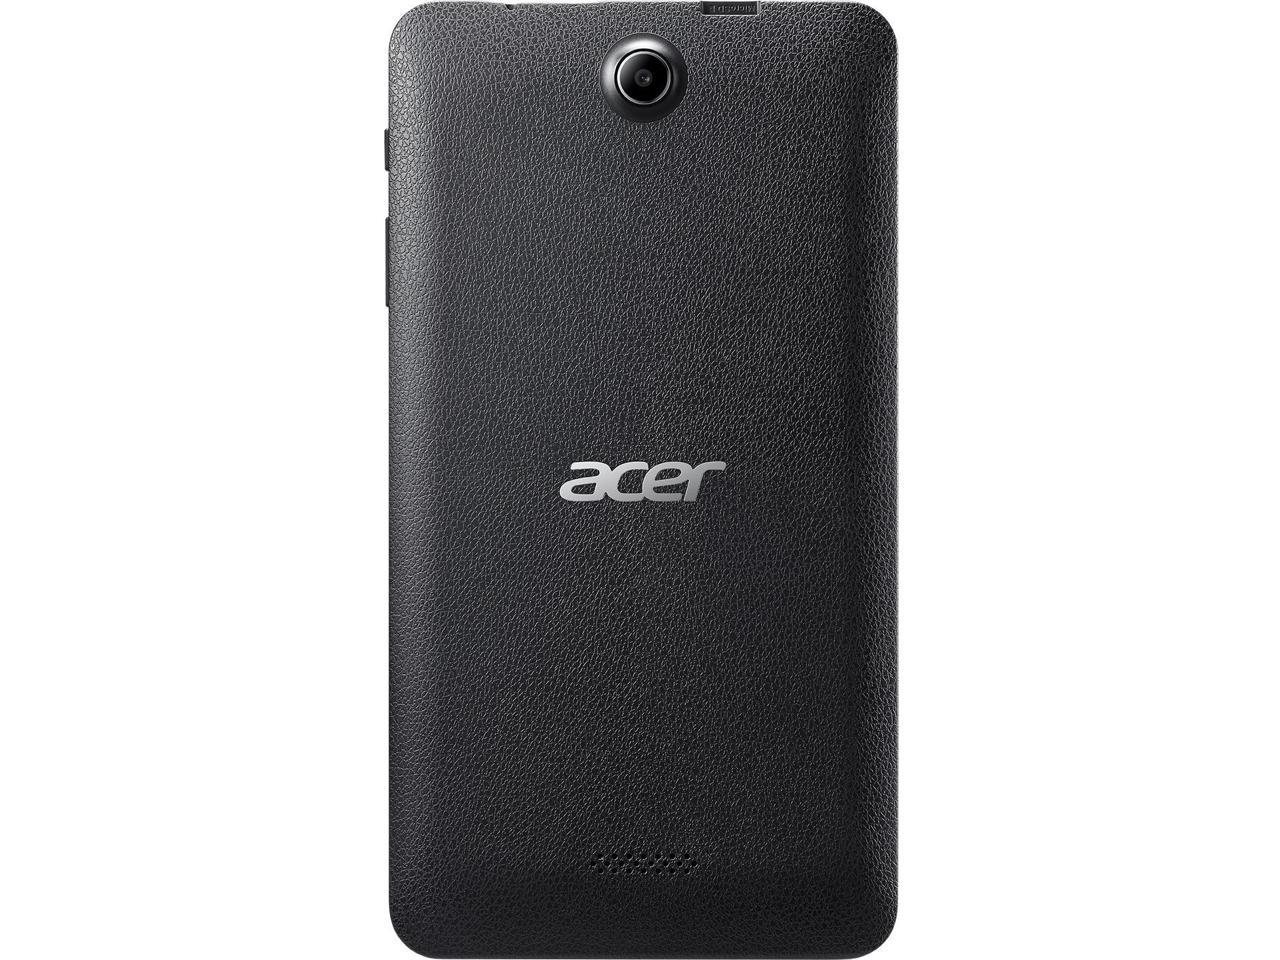 Acer Iconia One 7 B1-790-K46E Tablet - 7" - 1 GB DDR3L SDRAM - MediaTek Cortex A53 MT8163 Quad-core (4 Core) 1.30 GHz - 8 GB - Android 6.0 Marshmallow - 1280 x 720 - In-plane Switching (IPS) Technology